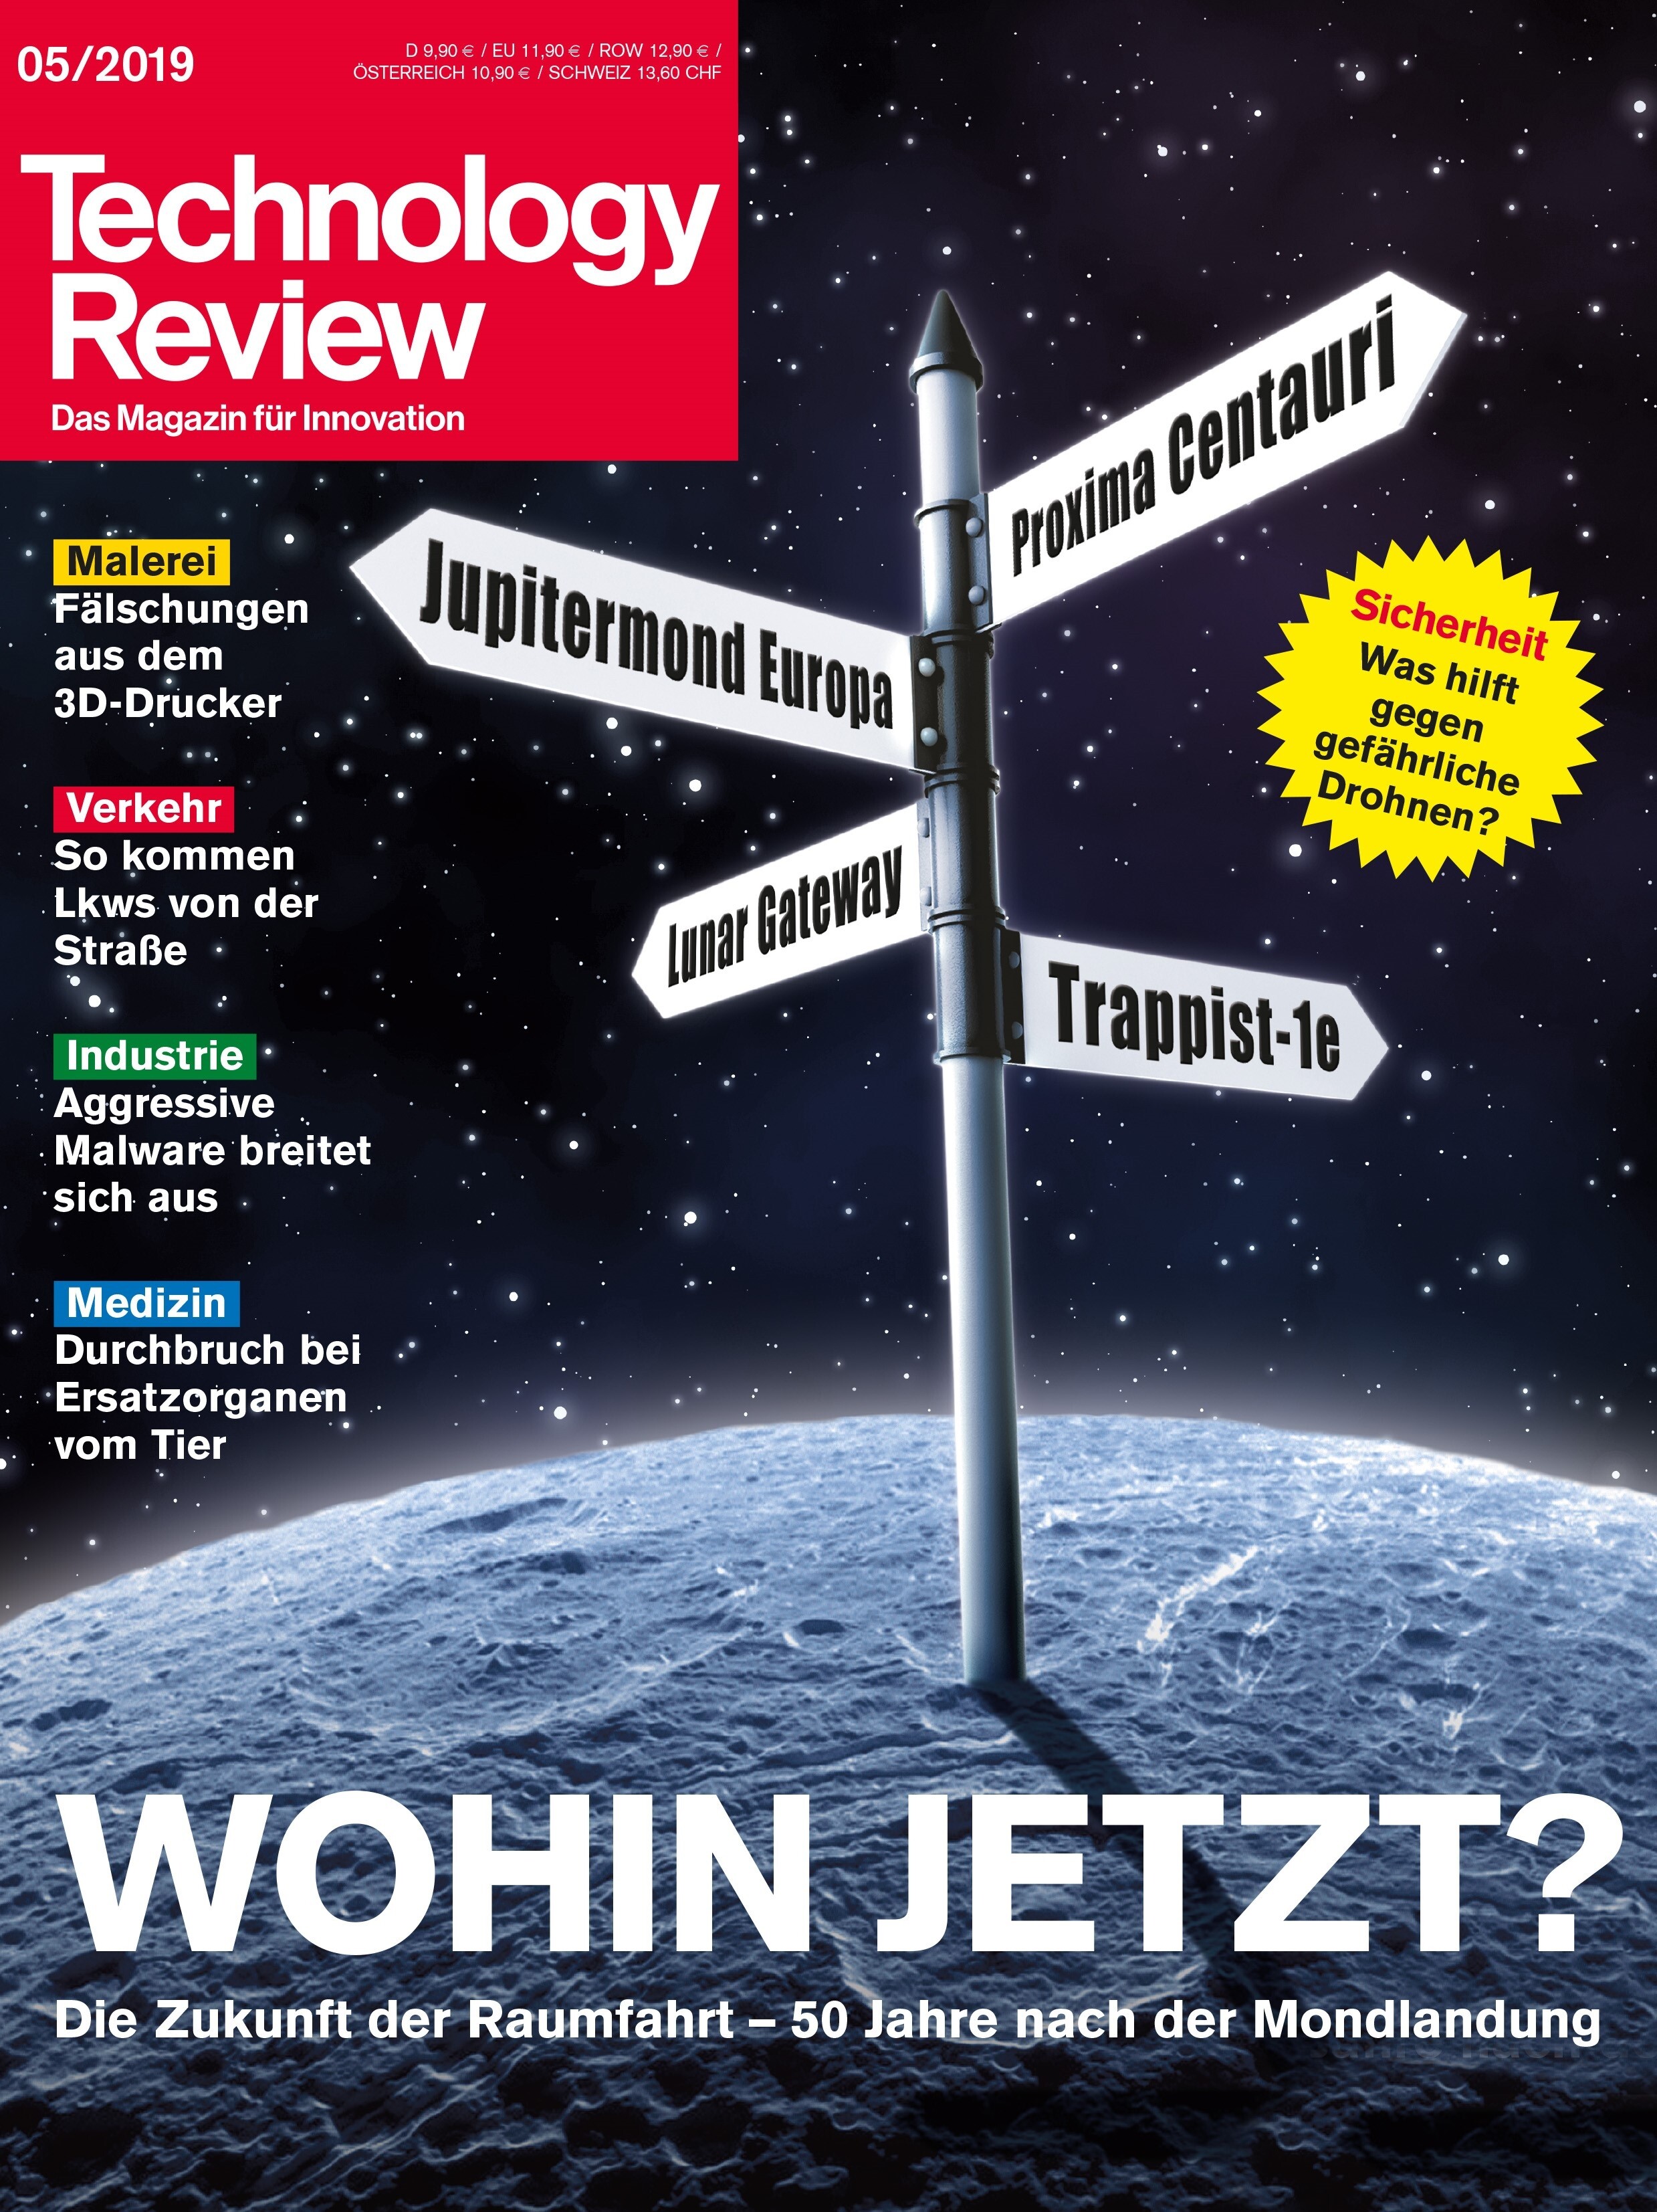 Technology Review 05/2019